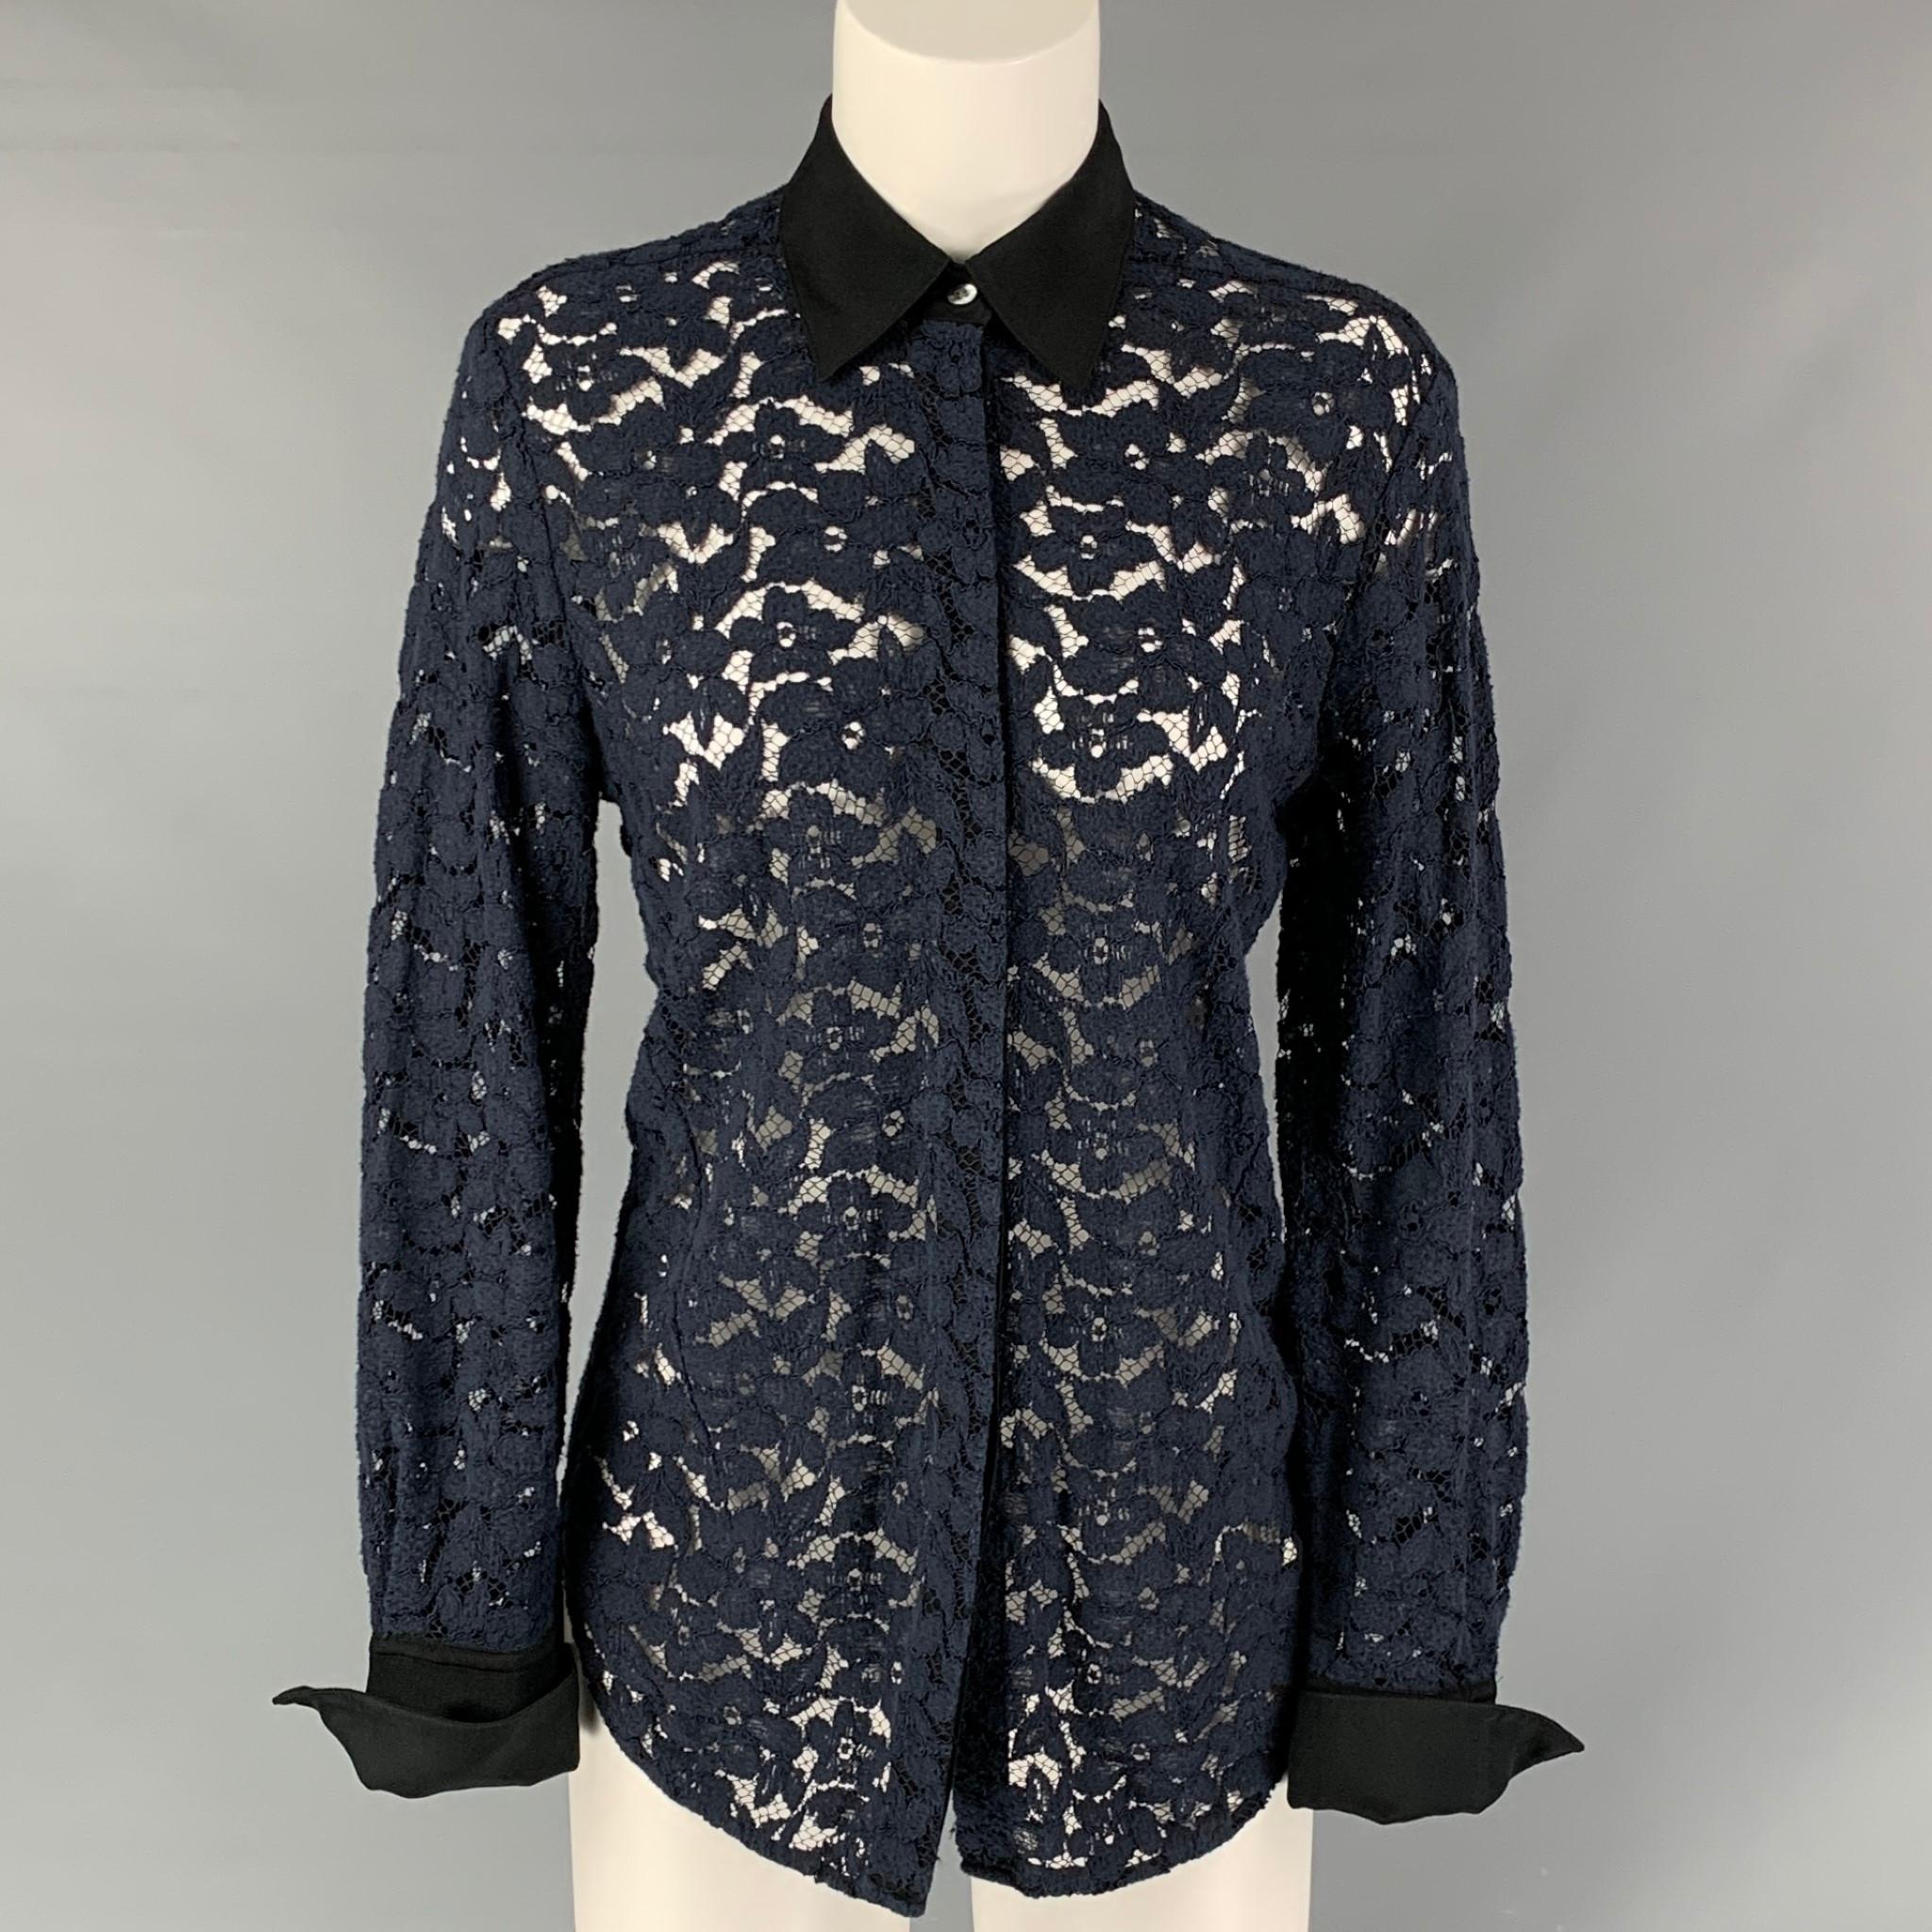 3.1 PHILLIP LIM long sleeves shirt comes in navy lace featuring a straight collar, hidden placket, and button down closure.

Excellent Pre-Owned Condition.
Marked: 4

Measurements:

Shoulder: 16.5 in.
Bust: 40 in.
Sleeve: 25 in.
Length: 27 in. 

